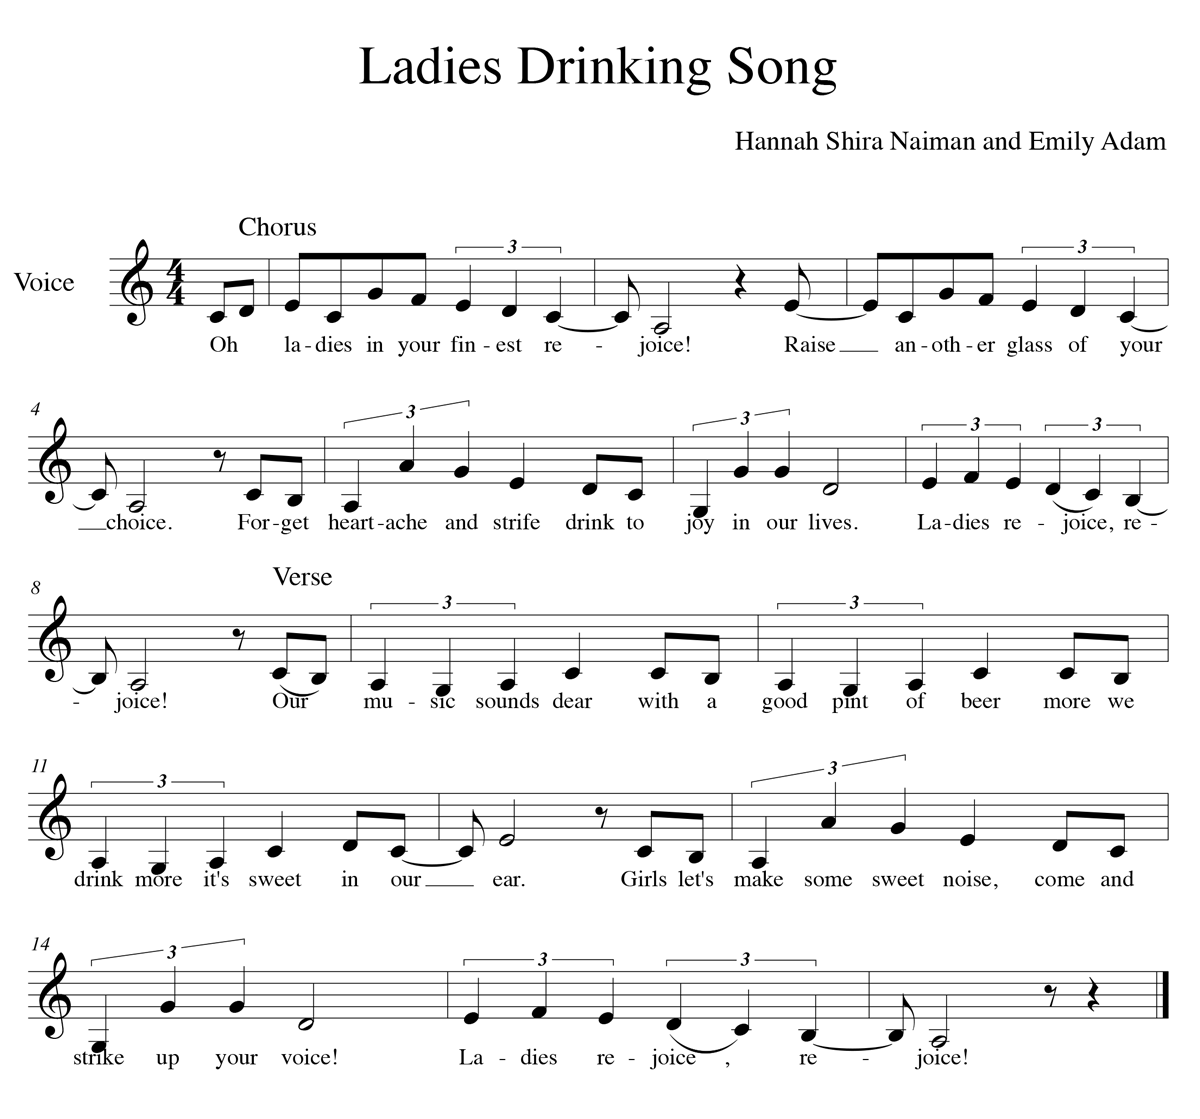 Ladies Drinking Song notation